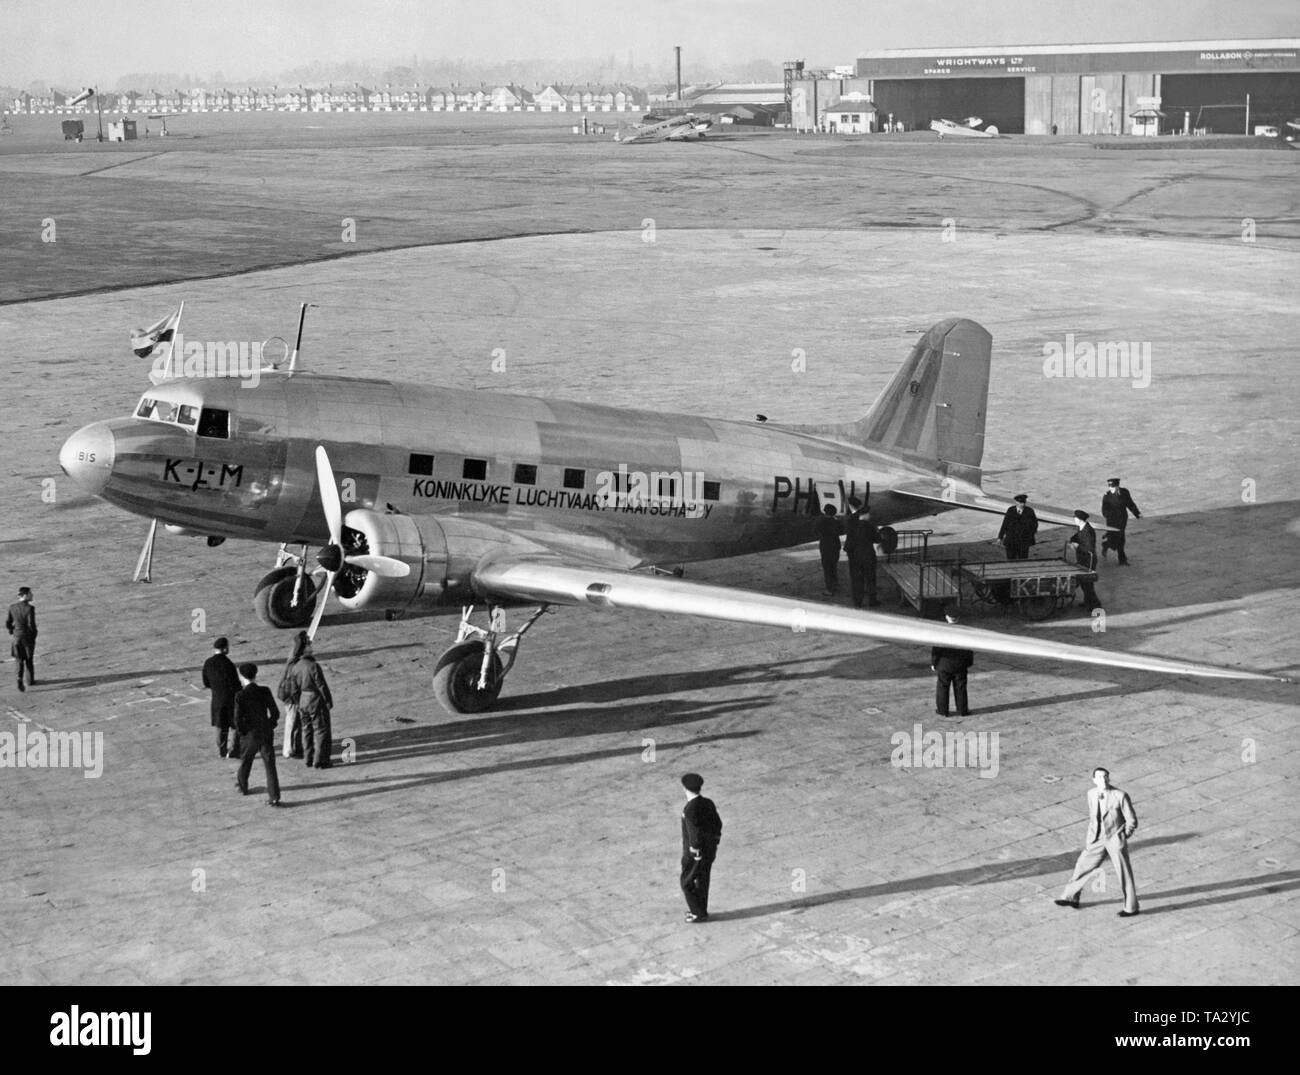 A Douglas DC-3 Dakota of the Dutch airline KLM (tail number PH-ALI, christening name 'Ibis') on the apron of the Croydon Airport in London. Stock Photo